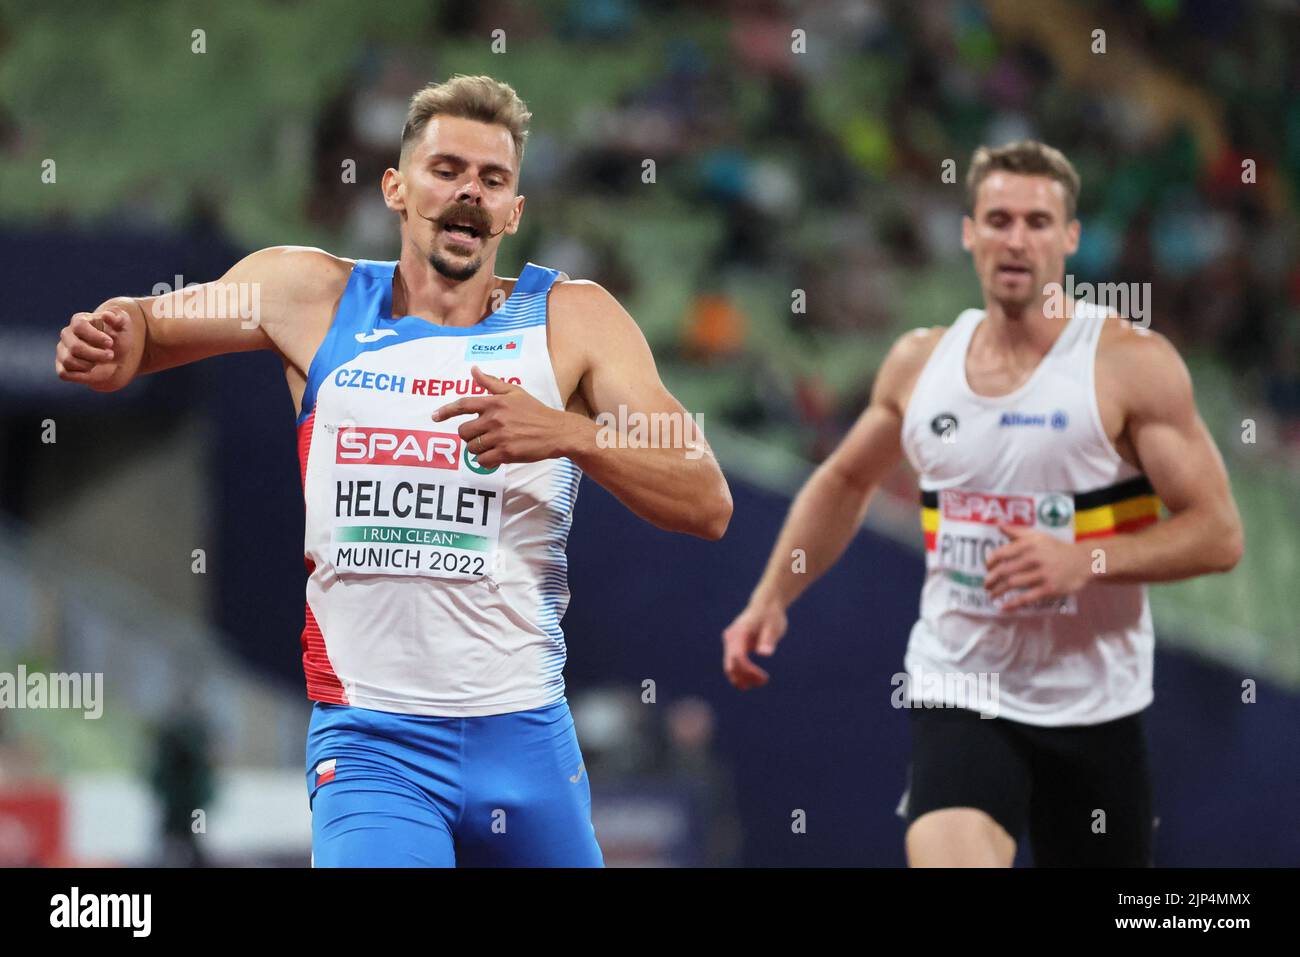 Athletics - 2022 European Championships - Olympiastadion, Munich, Germany - August 15, 2022 Czech Republic's Adam Helcelet in action during the men's decathlon 400m heats REUTERS/Wolfgang Rattay Stock Photo